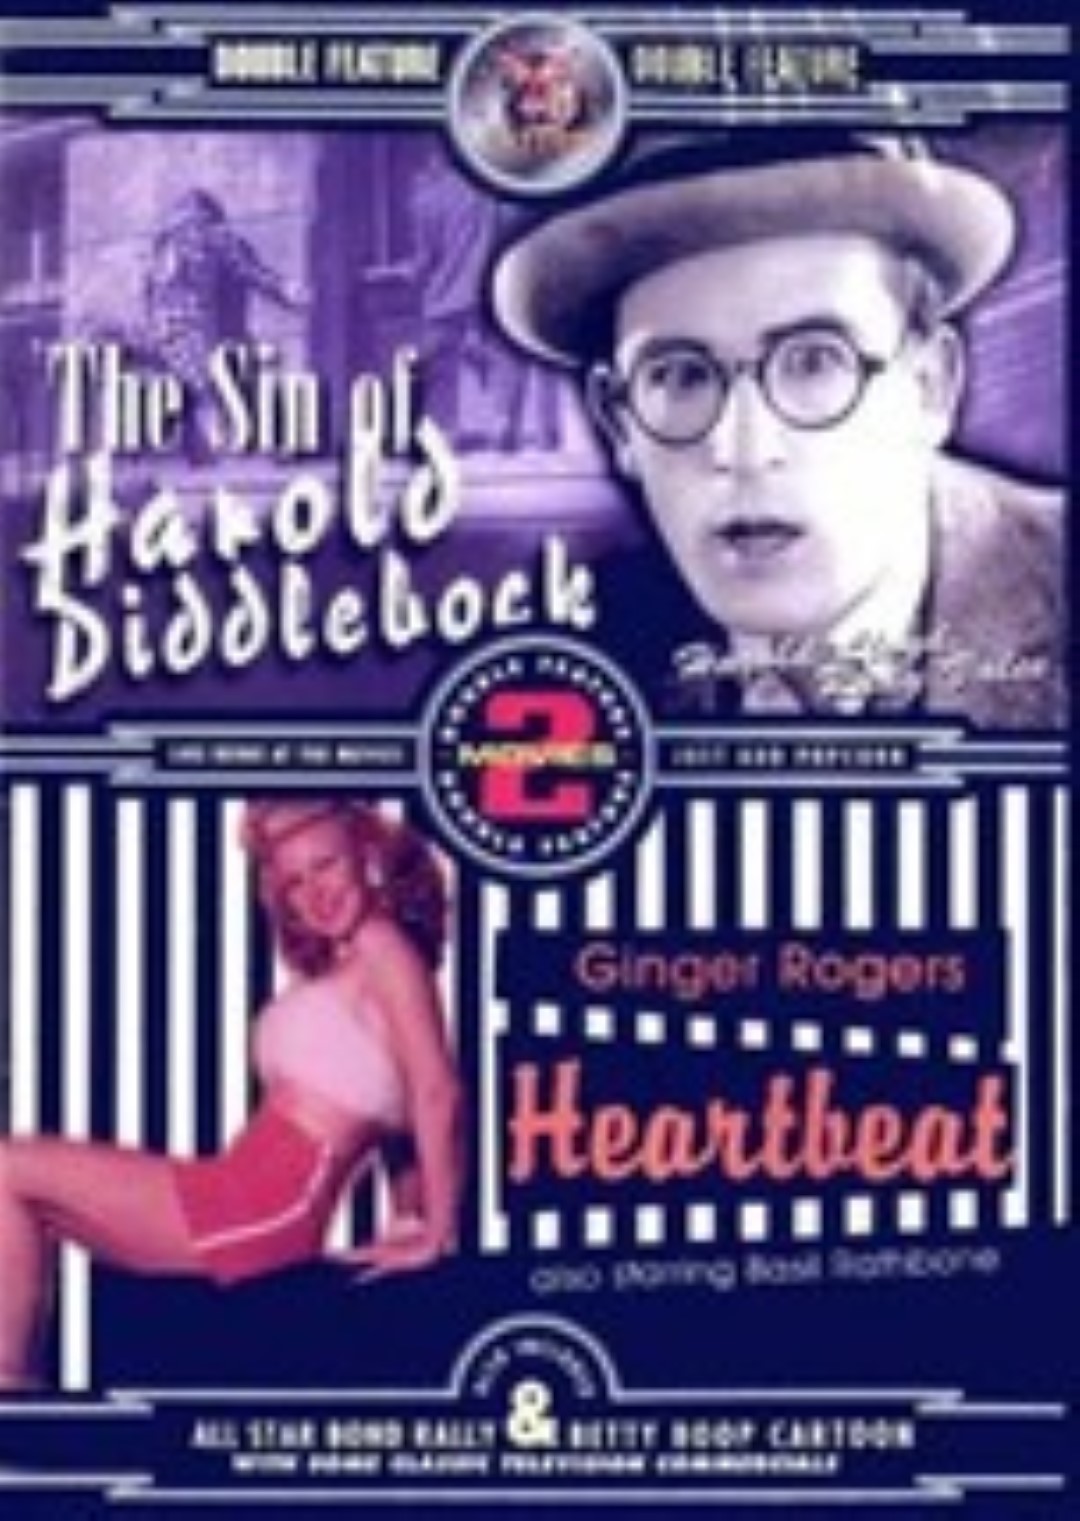 The sin of harold diddlebock  heartbeat  large 